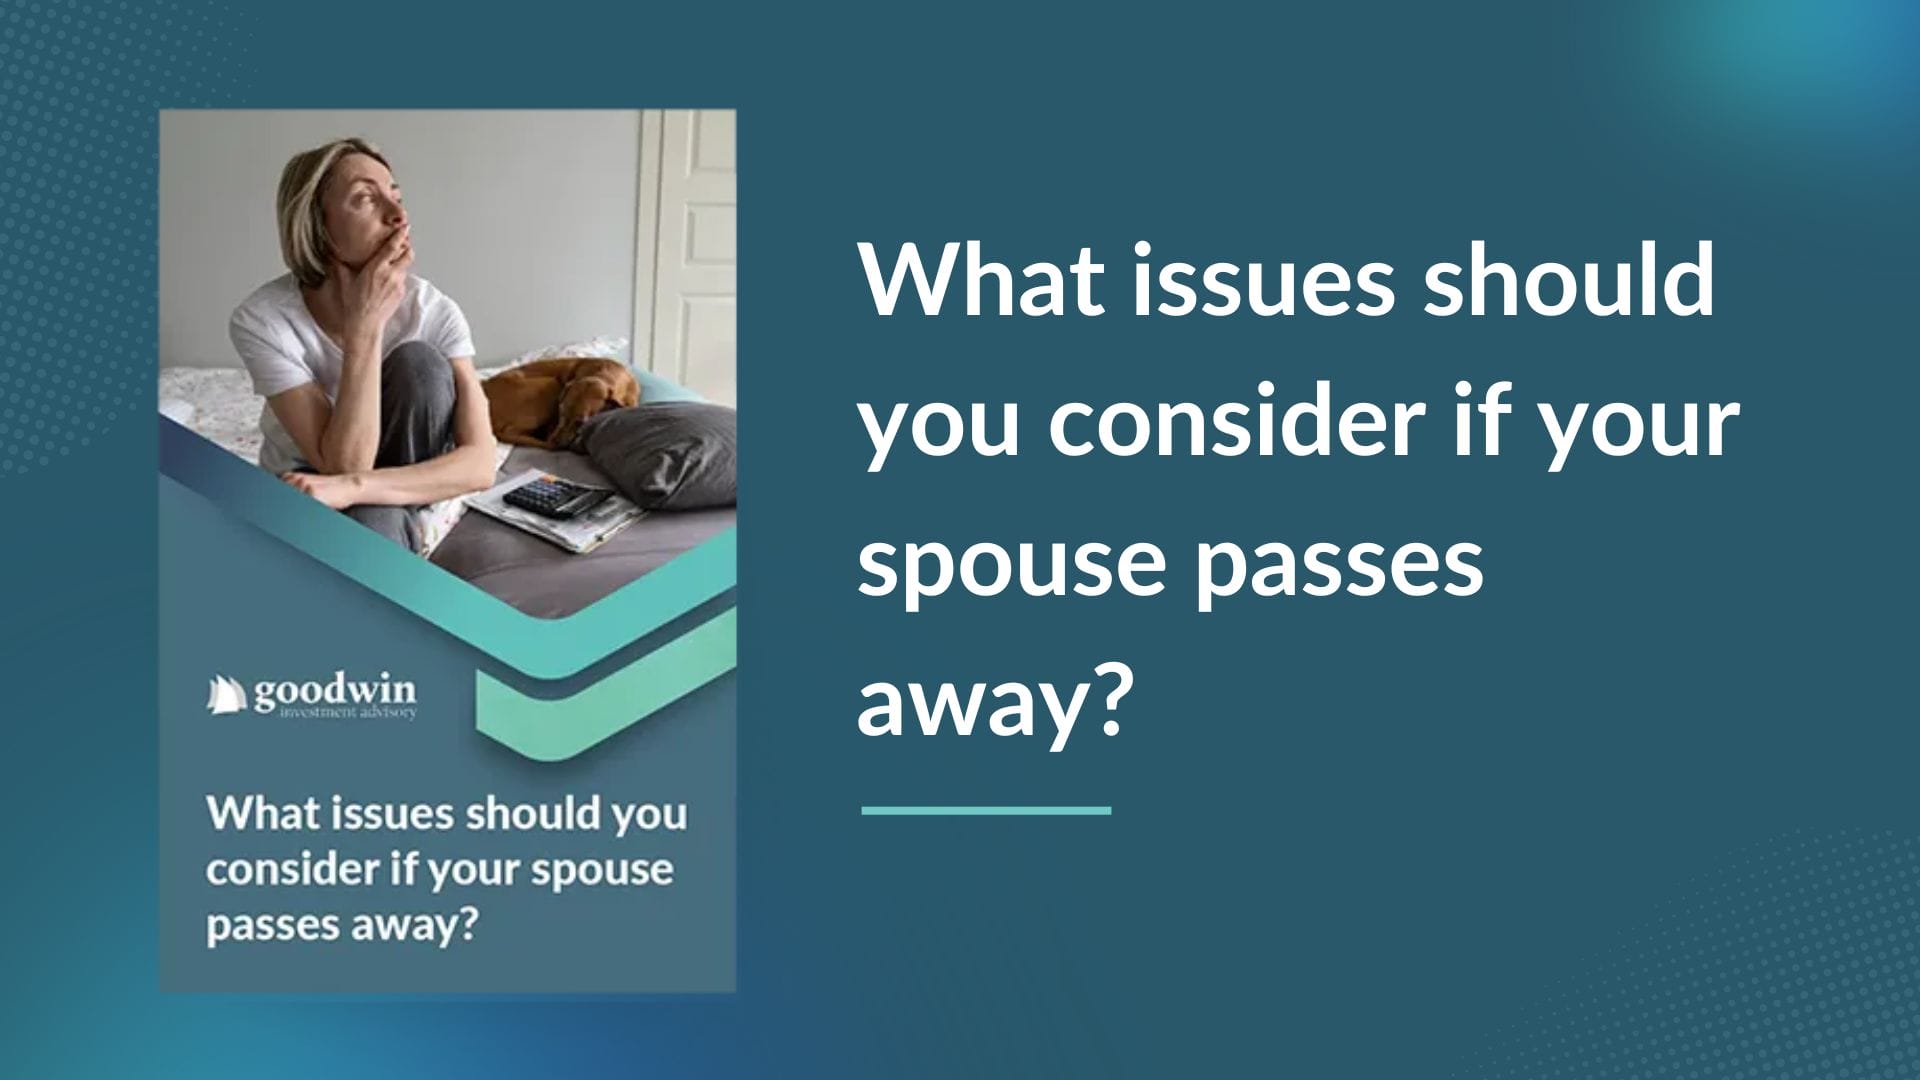 What issues should you consider if your spouse passes away?